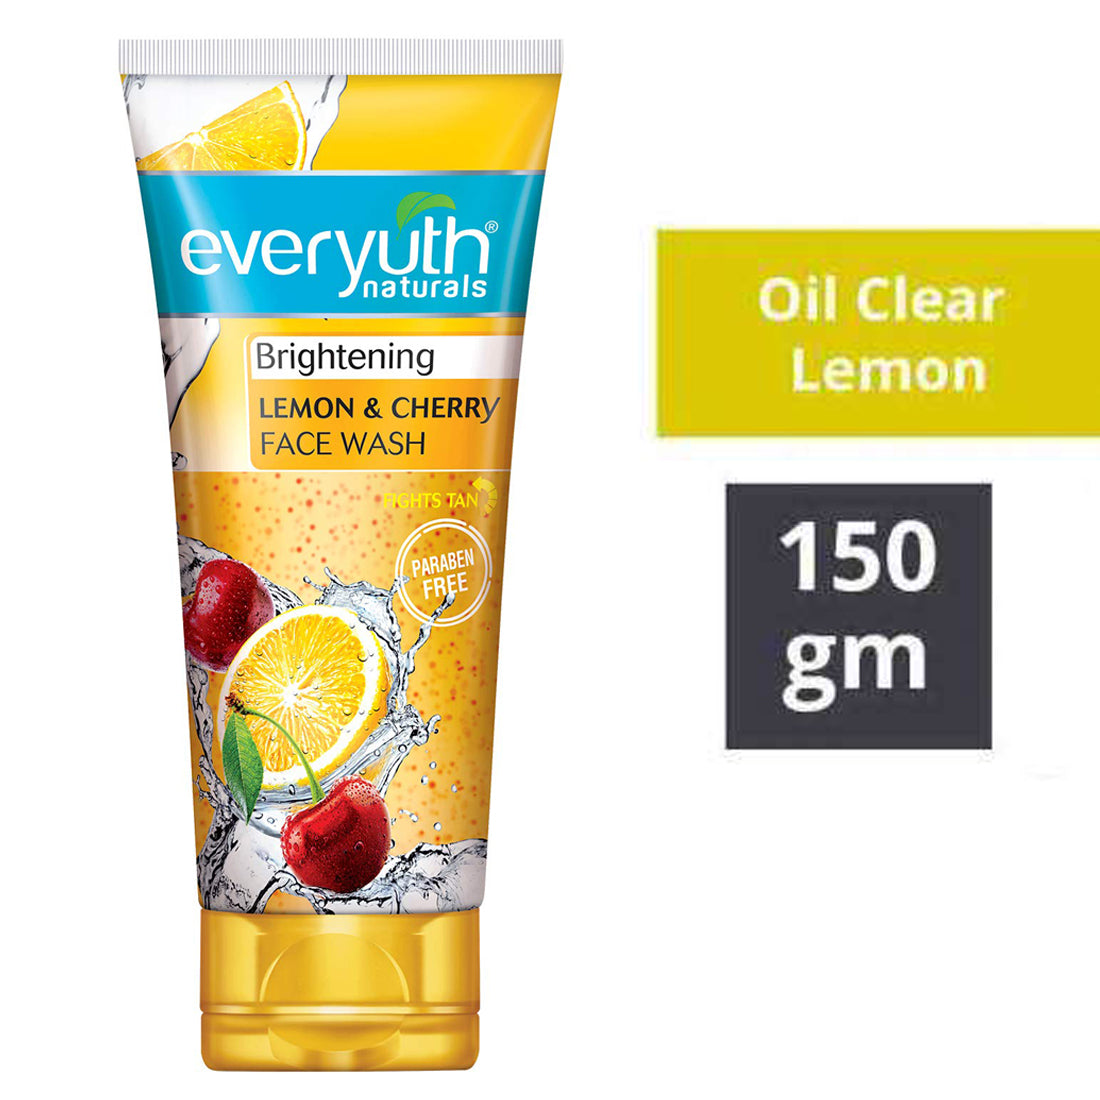 Everyuth Naturals Lemon And Cherry Face Wash All Skin Type - 150gm